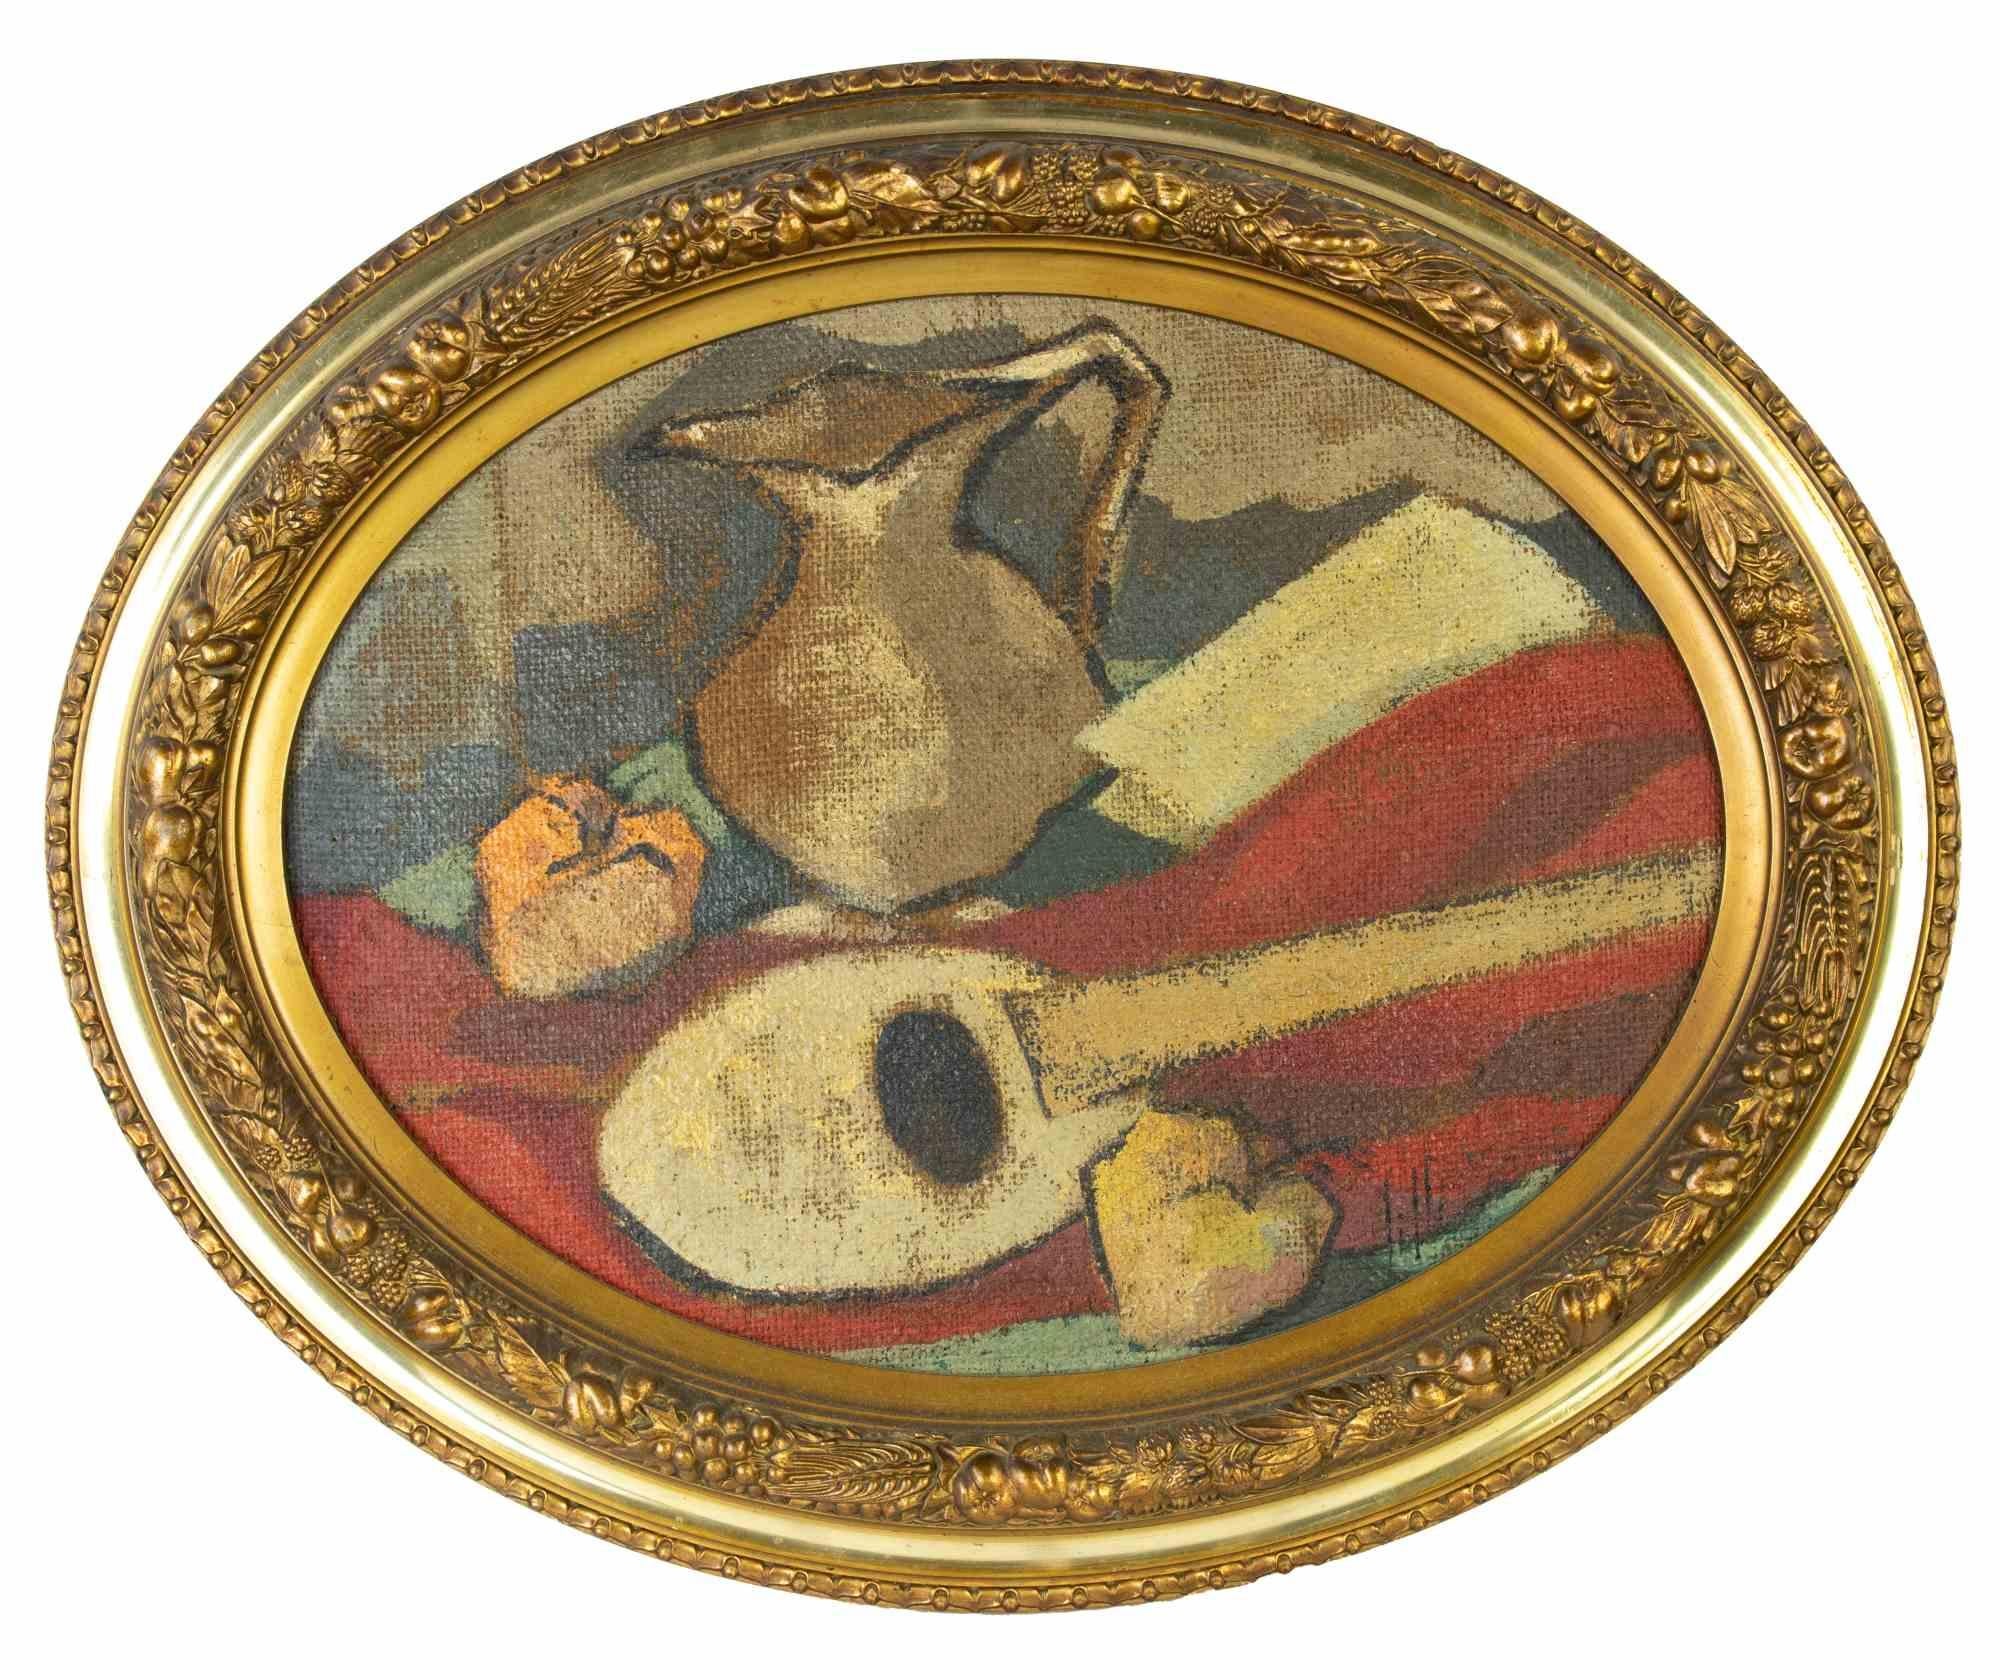 Unknown Figurative Painting - Oval Still Life - Oil on Canvas - Mid-20th Century